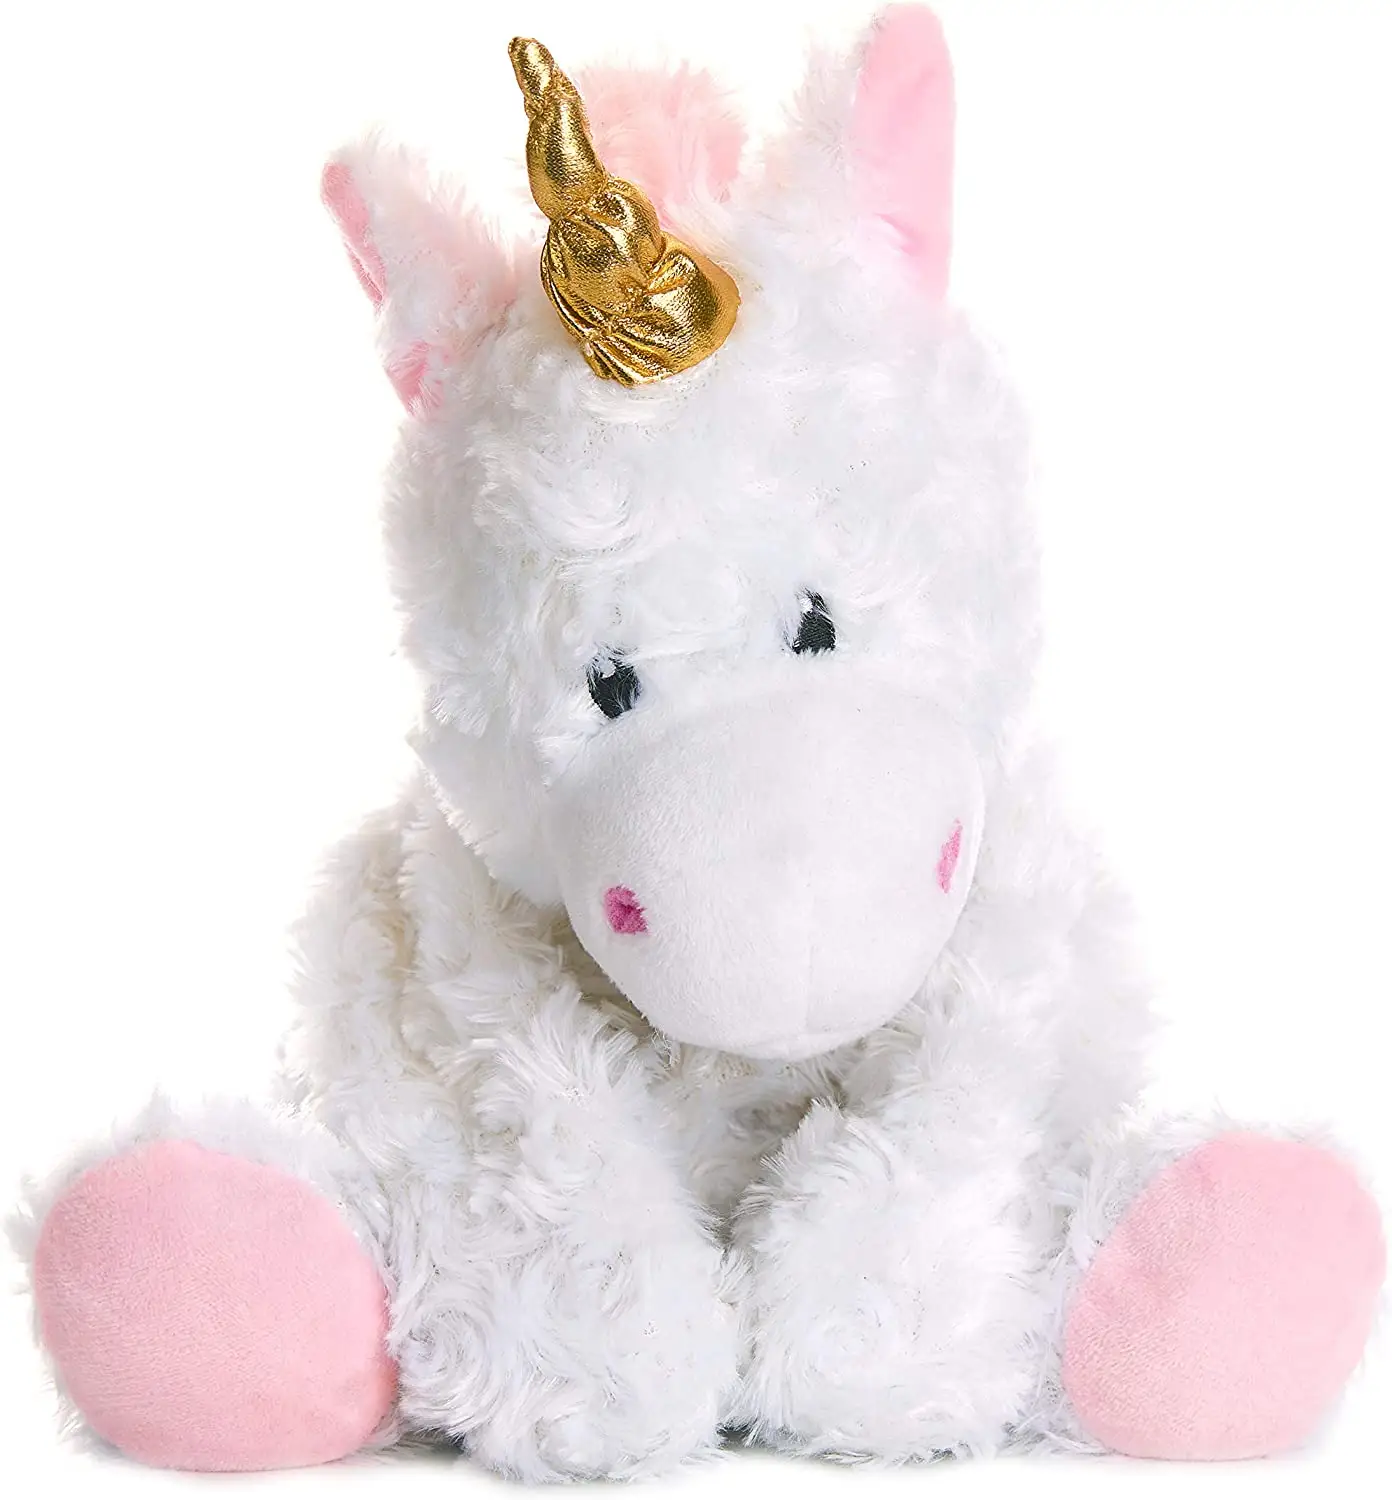 Hot sale lavender scented heatable soft cute unicorn weighted warmies stuffed animals microwavable toy for kids